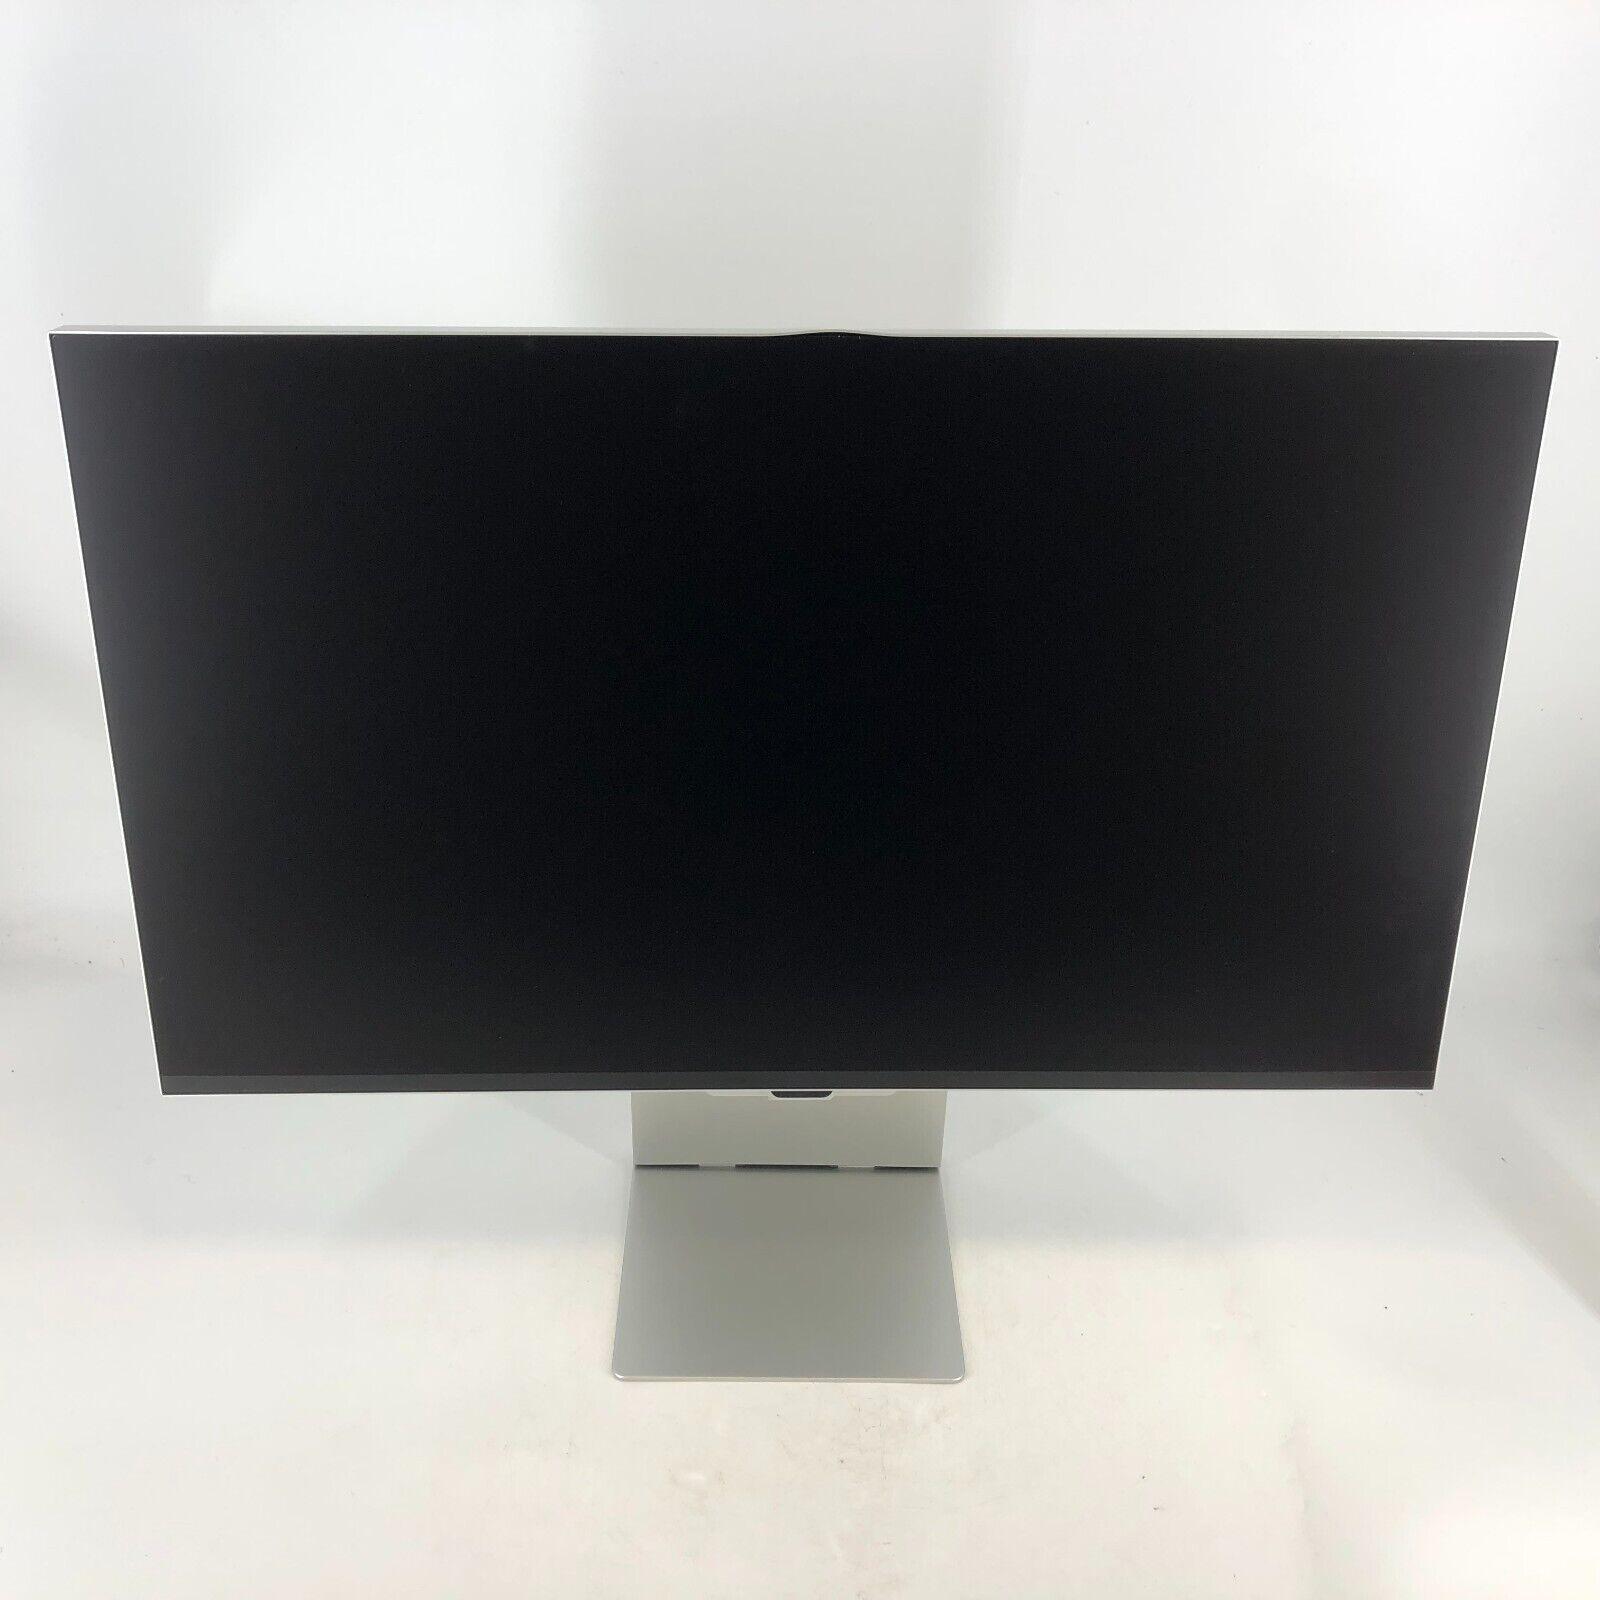 Samsung ViewFinity S9 27in 5K (5120 x 2880) - Fair Condition